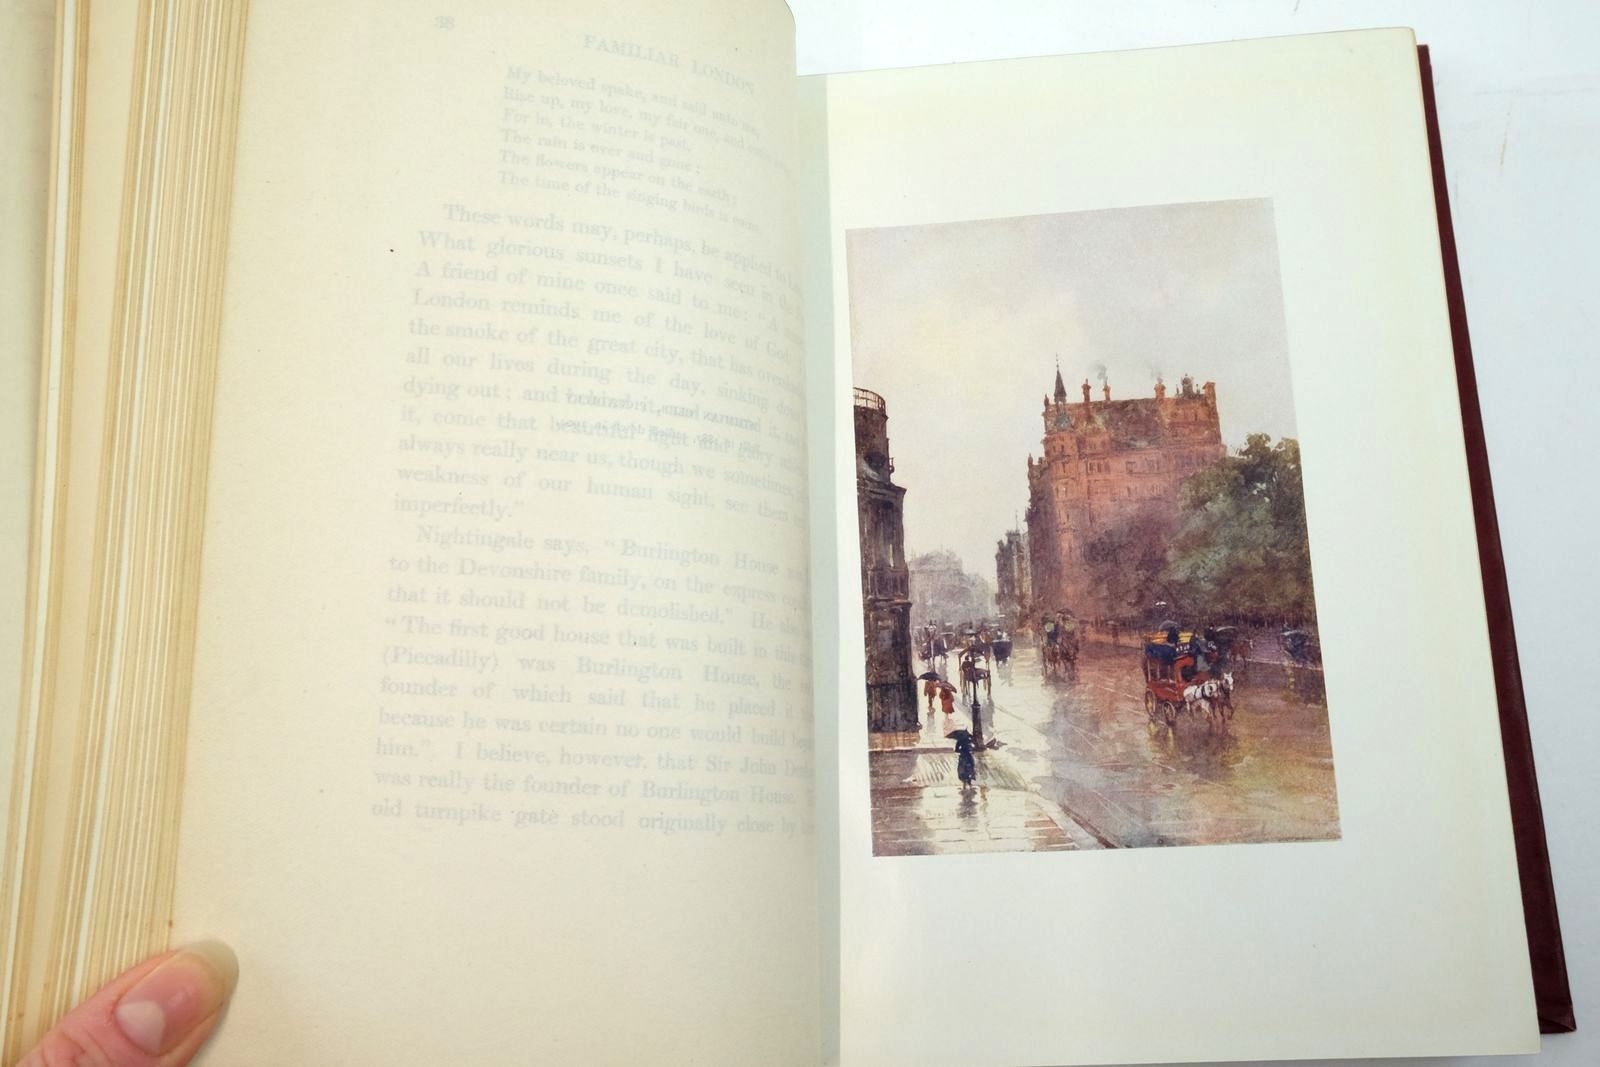 Photo of FAMILIAR LONDON written by Barton, Rose illustrated by Barton, Rose published by Adam & Charles Black (STOCK CODE: 2137236)  for sale by Stella & Rose's Books